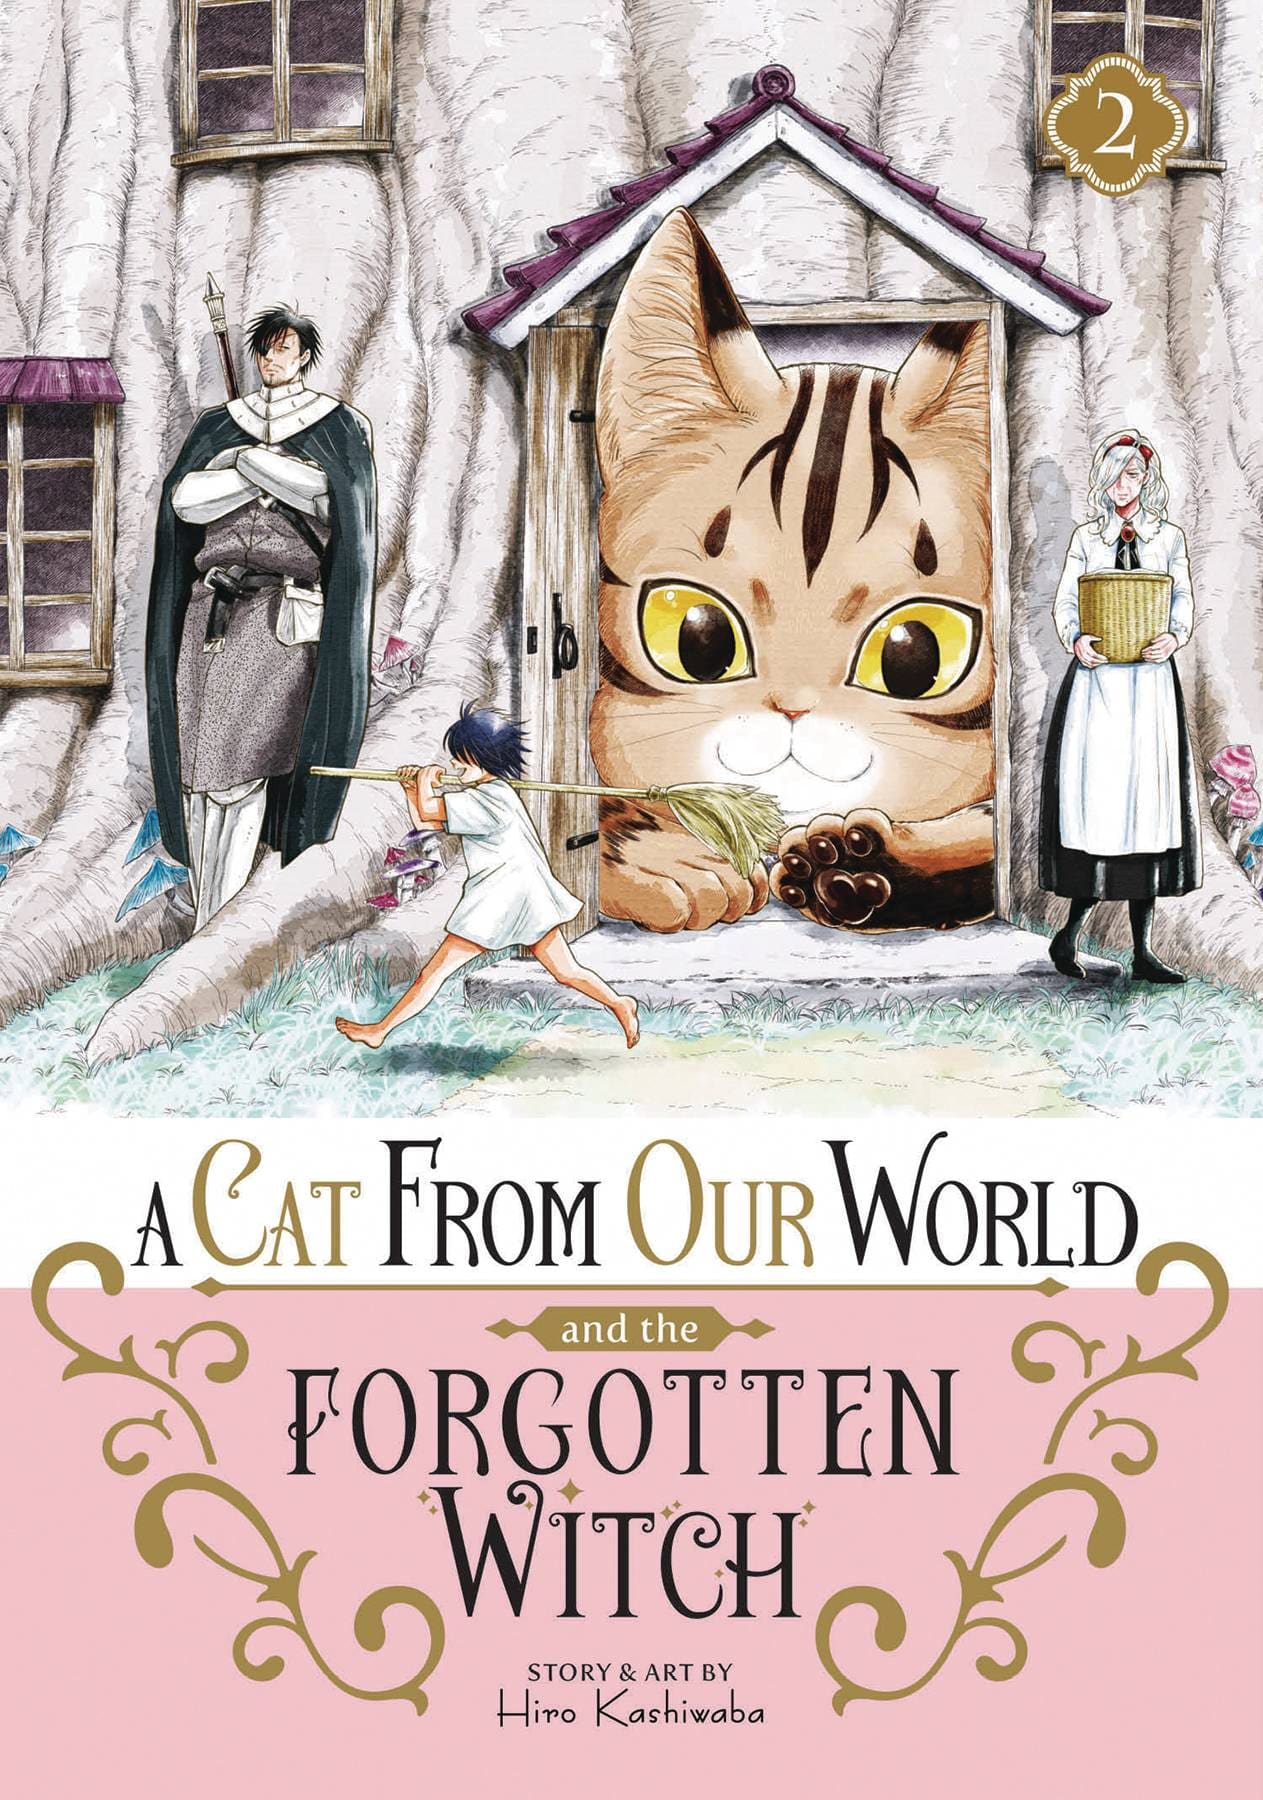 CAT FROM OUR WORLD & FORGOTTEN WITCH GN VOL 02